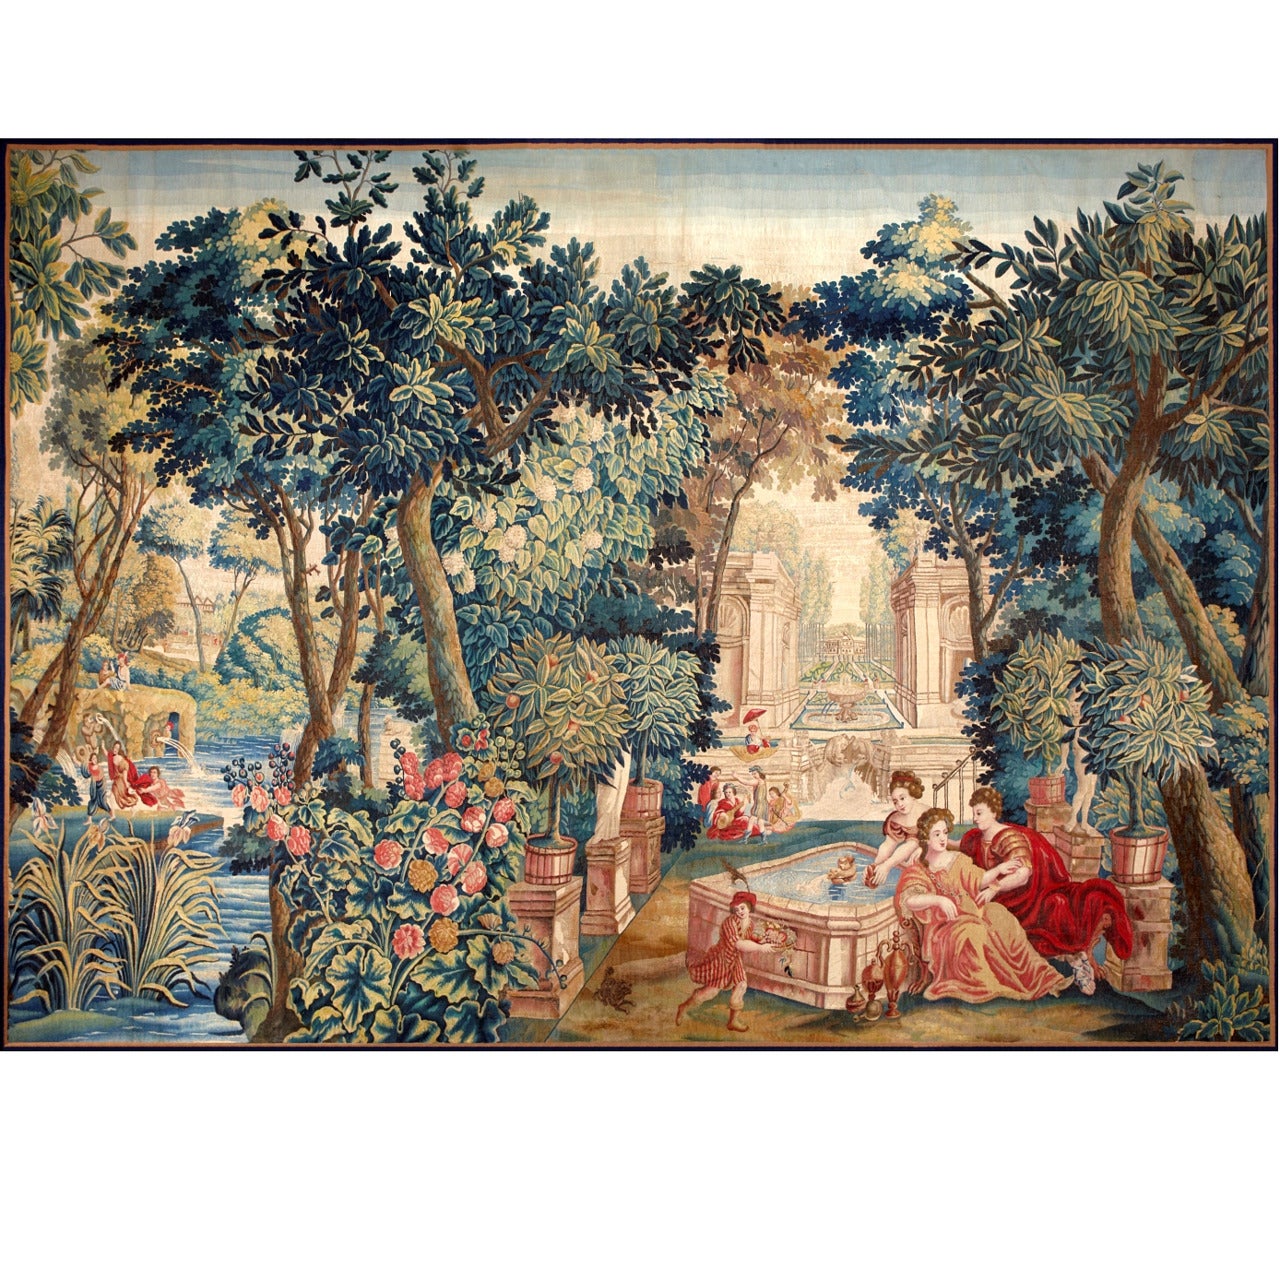 Rare Antique Tapestry - Brussels Mid-17th Century  "Allegory of Spring" For Sale